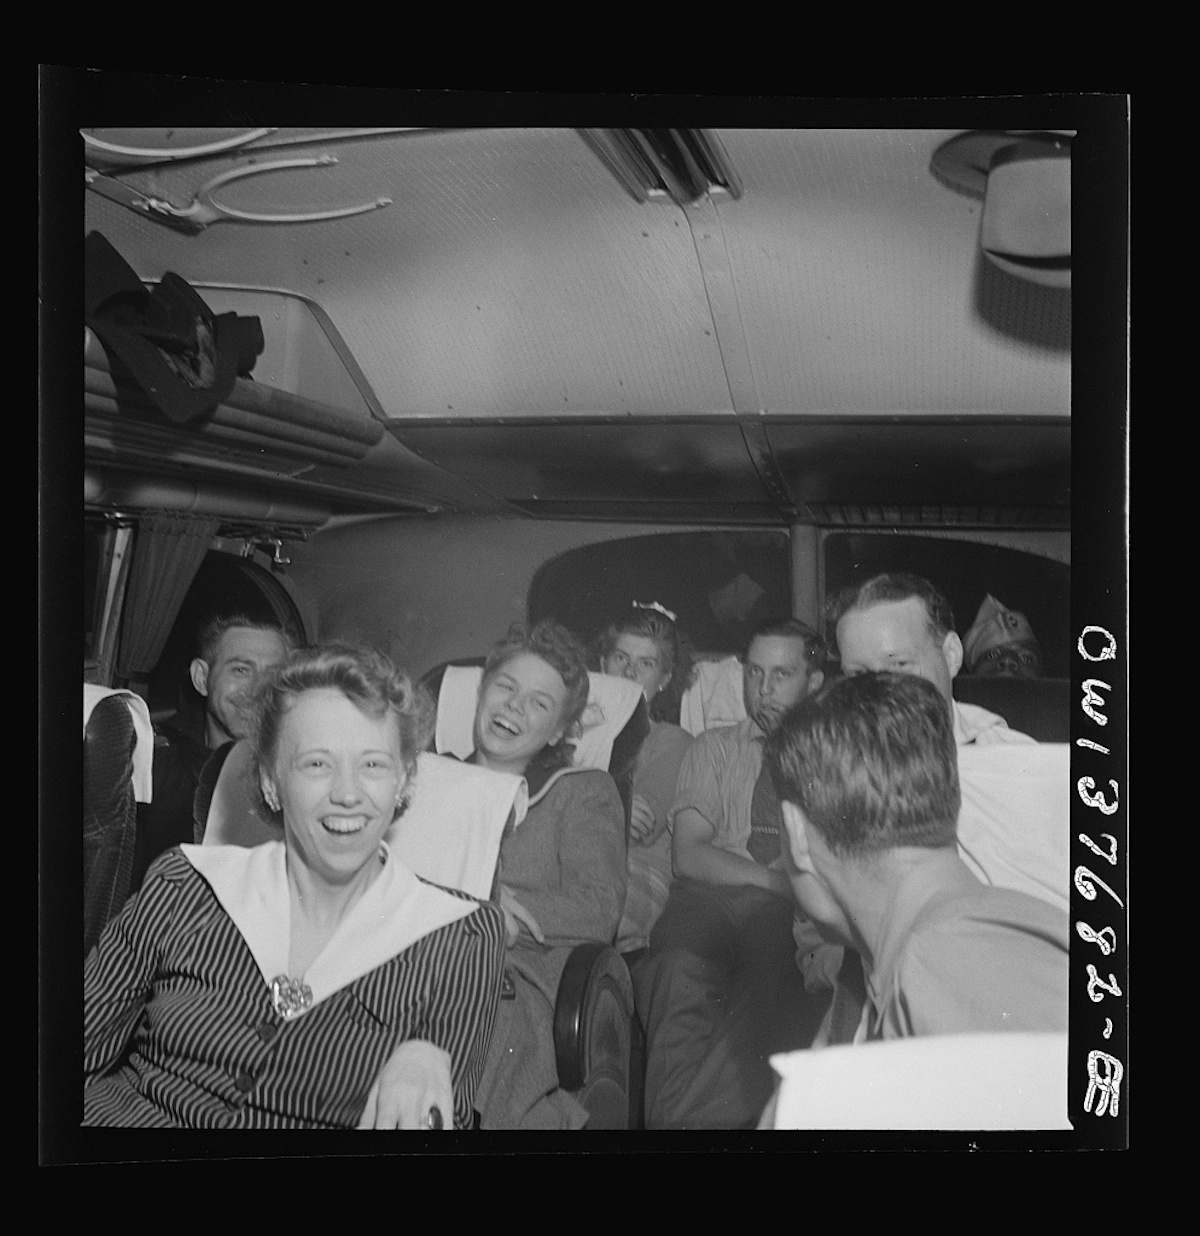 Passengers who have struck up a friendship on a Greyhound bus enroute from Pittsburgh, Pennsylvania to Saint Louis, Missouri telling moron jokes